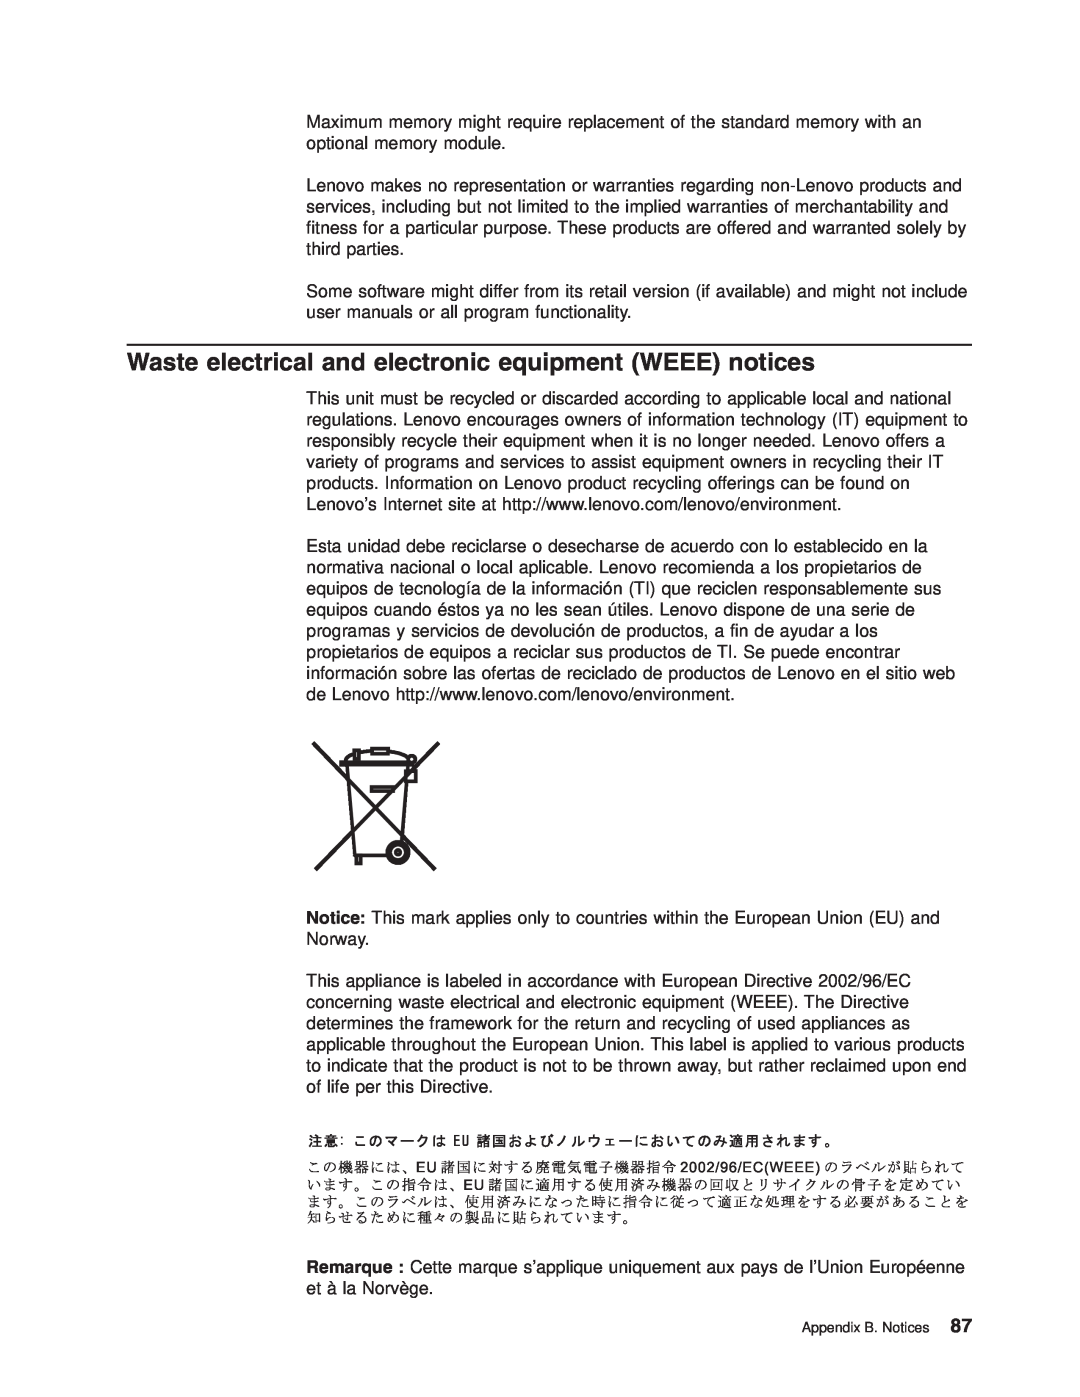 Lenovo 6446, 6447, 6445, 6444 manual Waste electrical and electronic equipment WEEE notices, Appendix B. Notices 